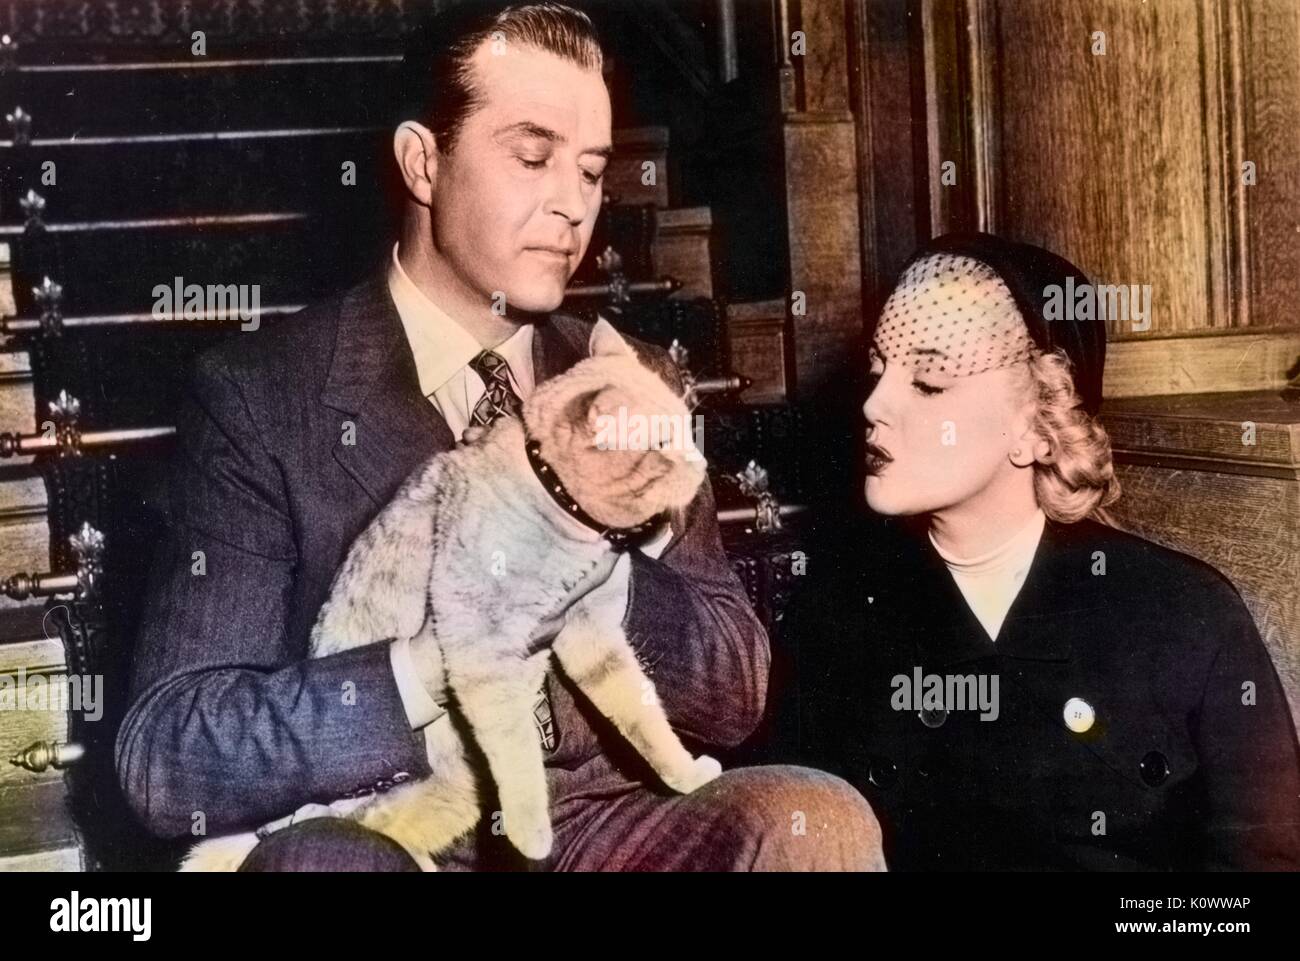 Ray Milland and Jan Sterling with Rhubarb, a cat, 1968. Note: Image has been digitally colorized using a modern process. Colors may not be period-accurate. Stock Photo